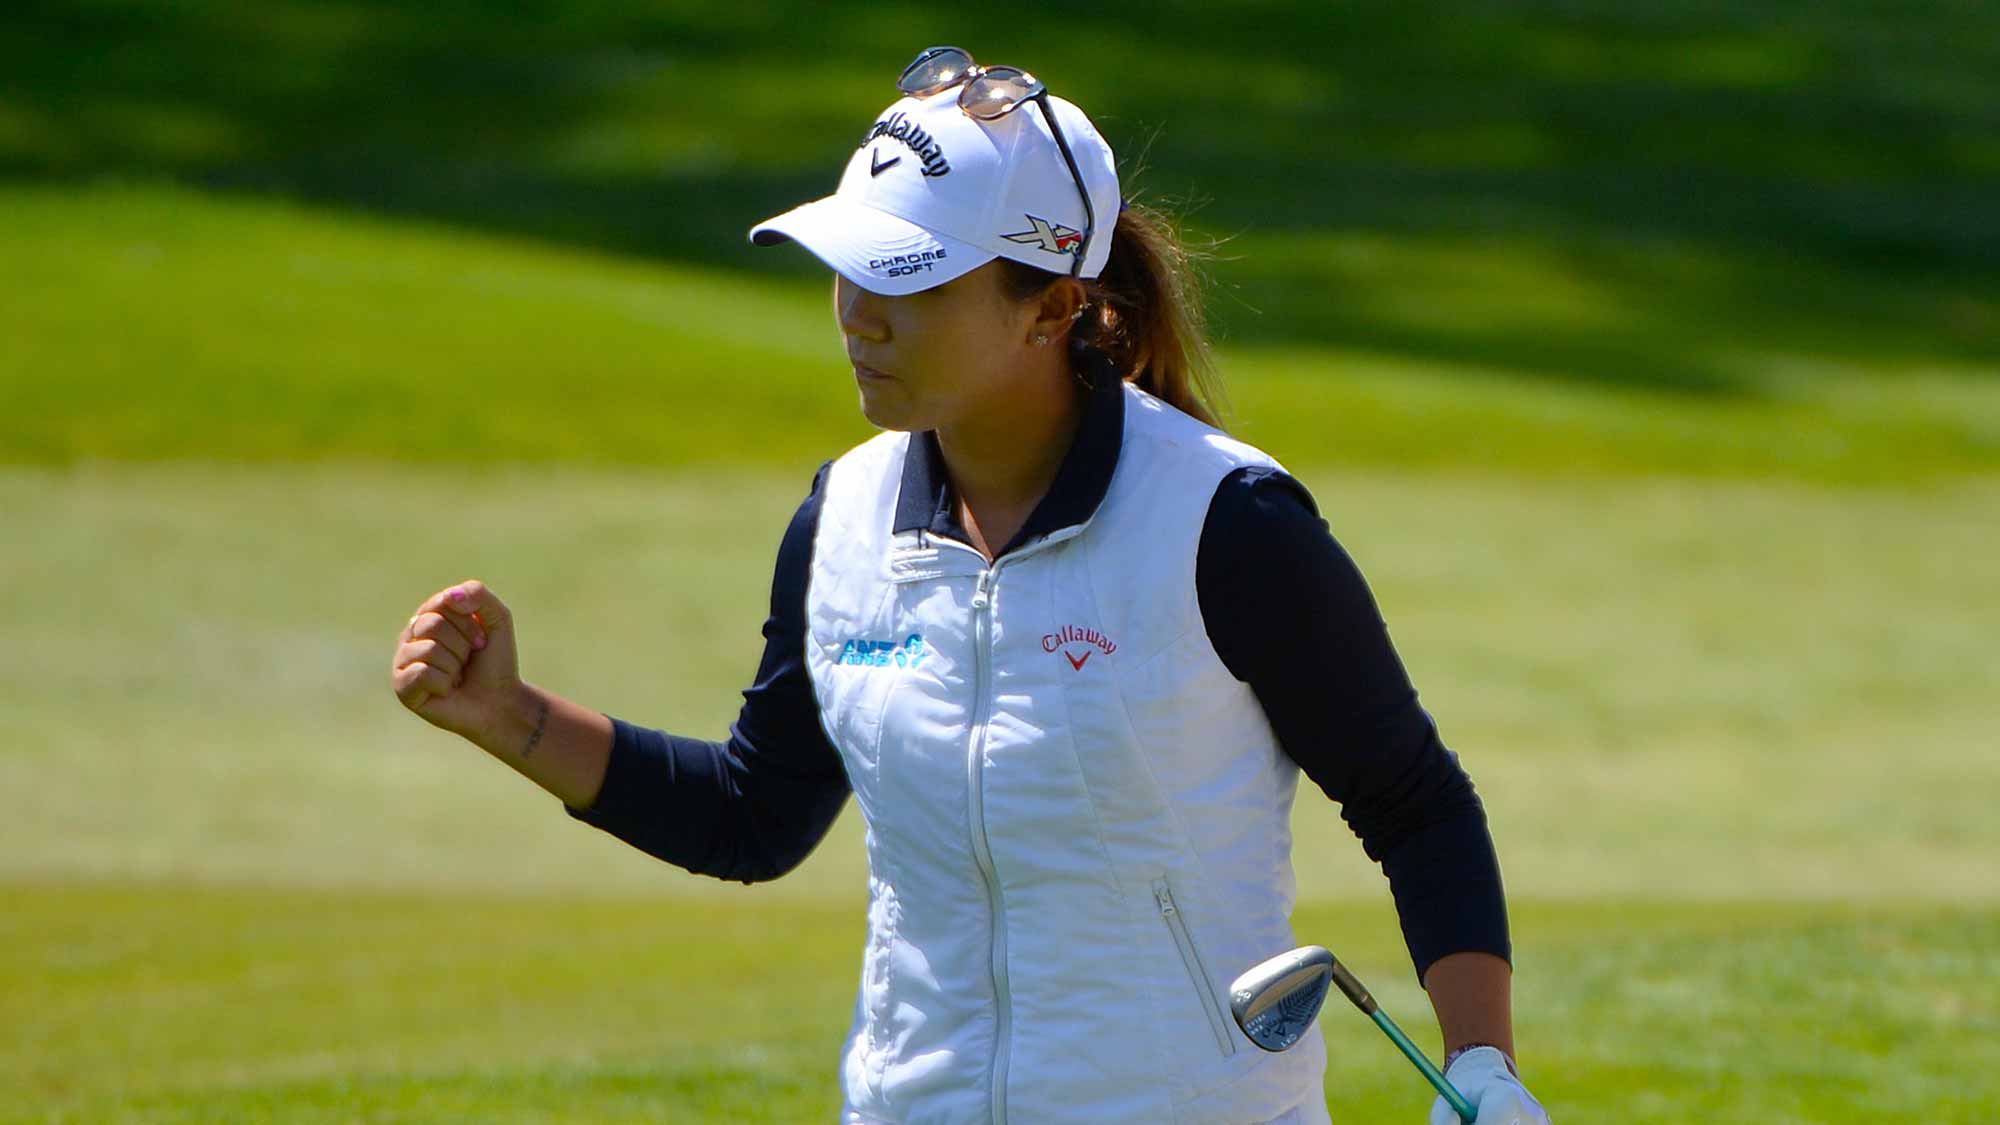 Lydia Ko of New Zealand celebrates a chip shot for a birdie on the fourth hole during round three of the Swinging Skirts LPGA Classic presented by CTBC at the Lake Merced Golf Club